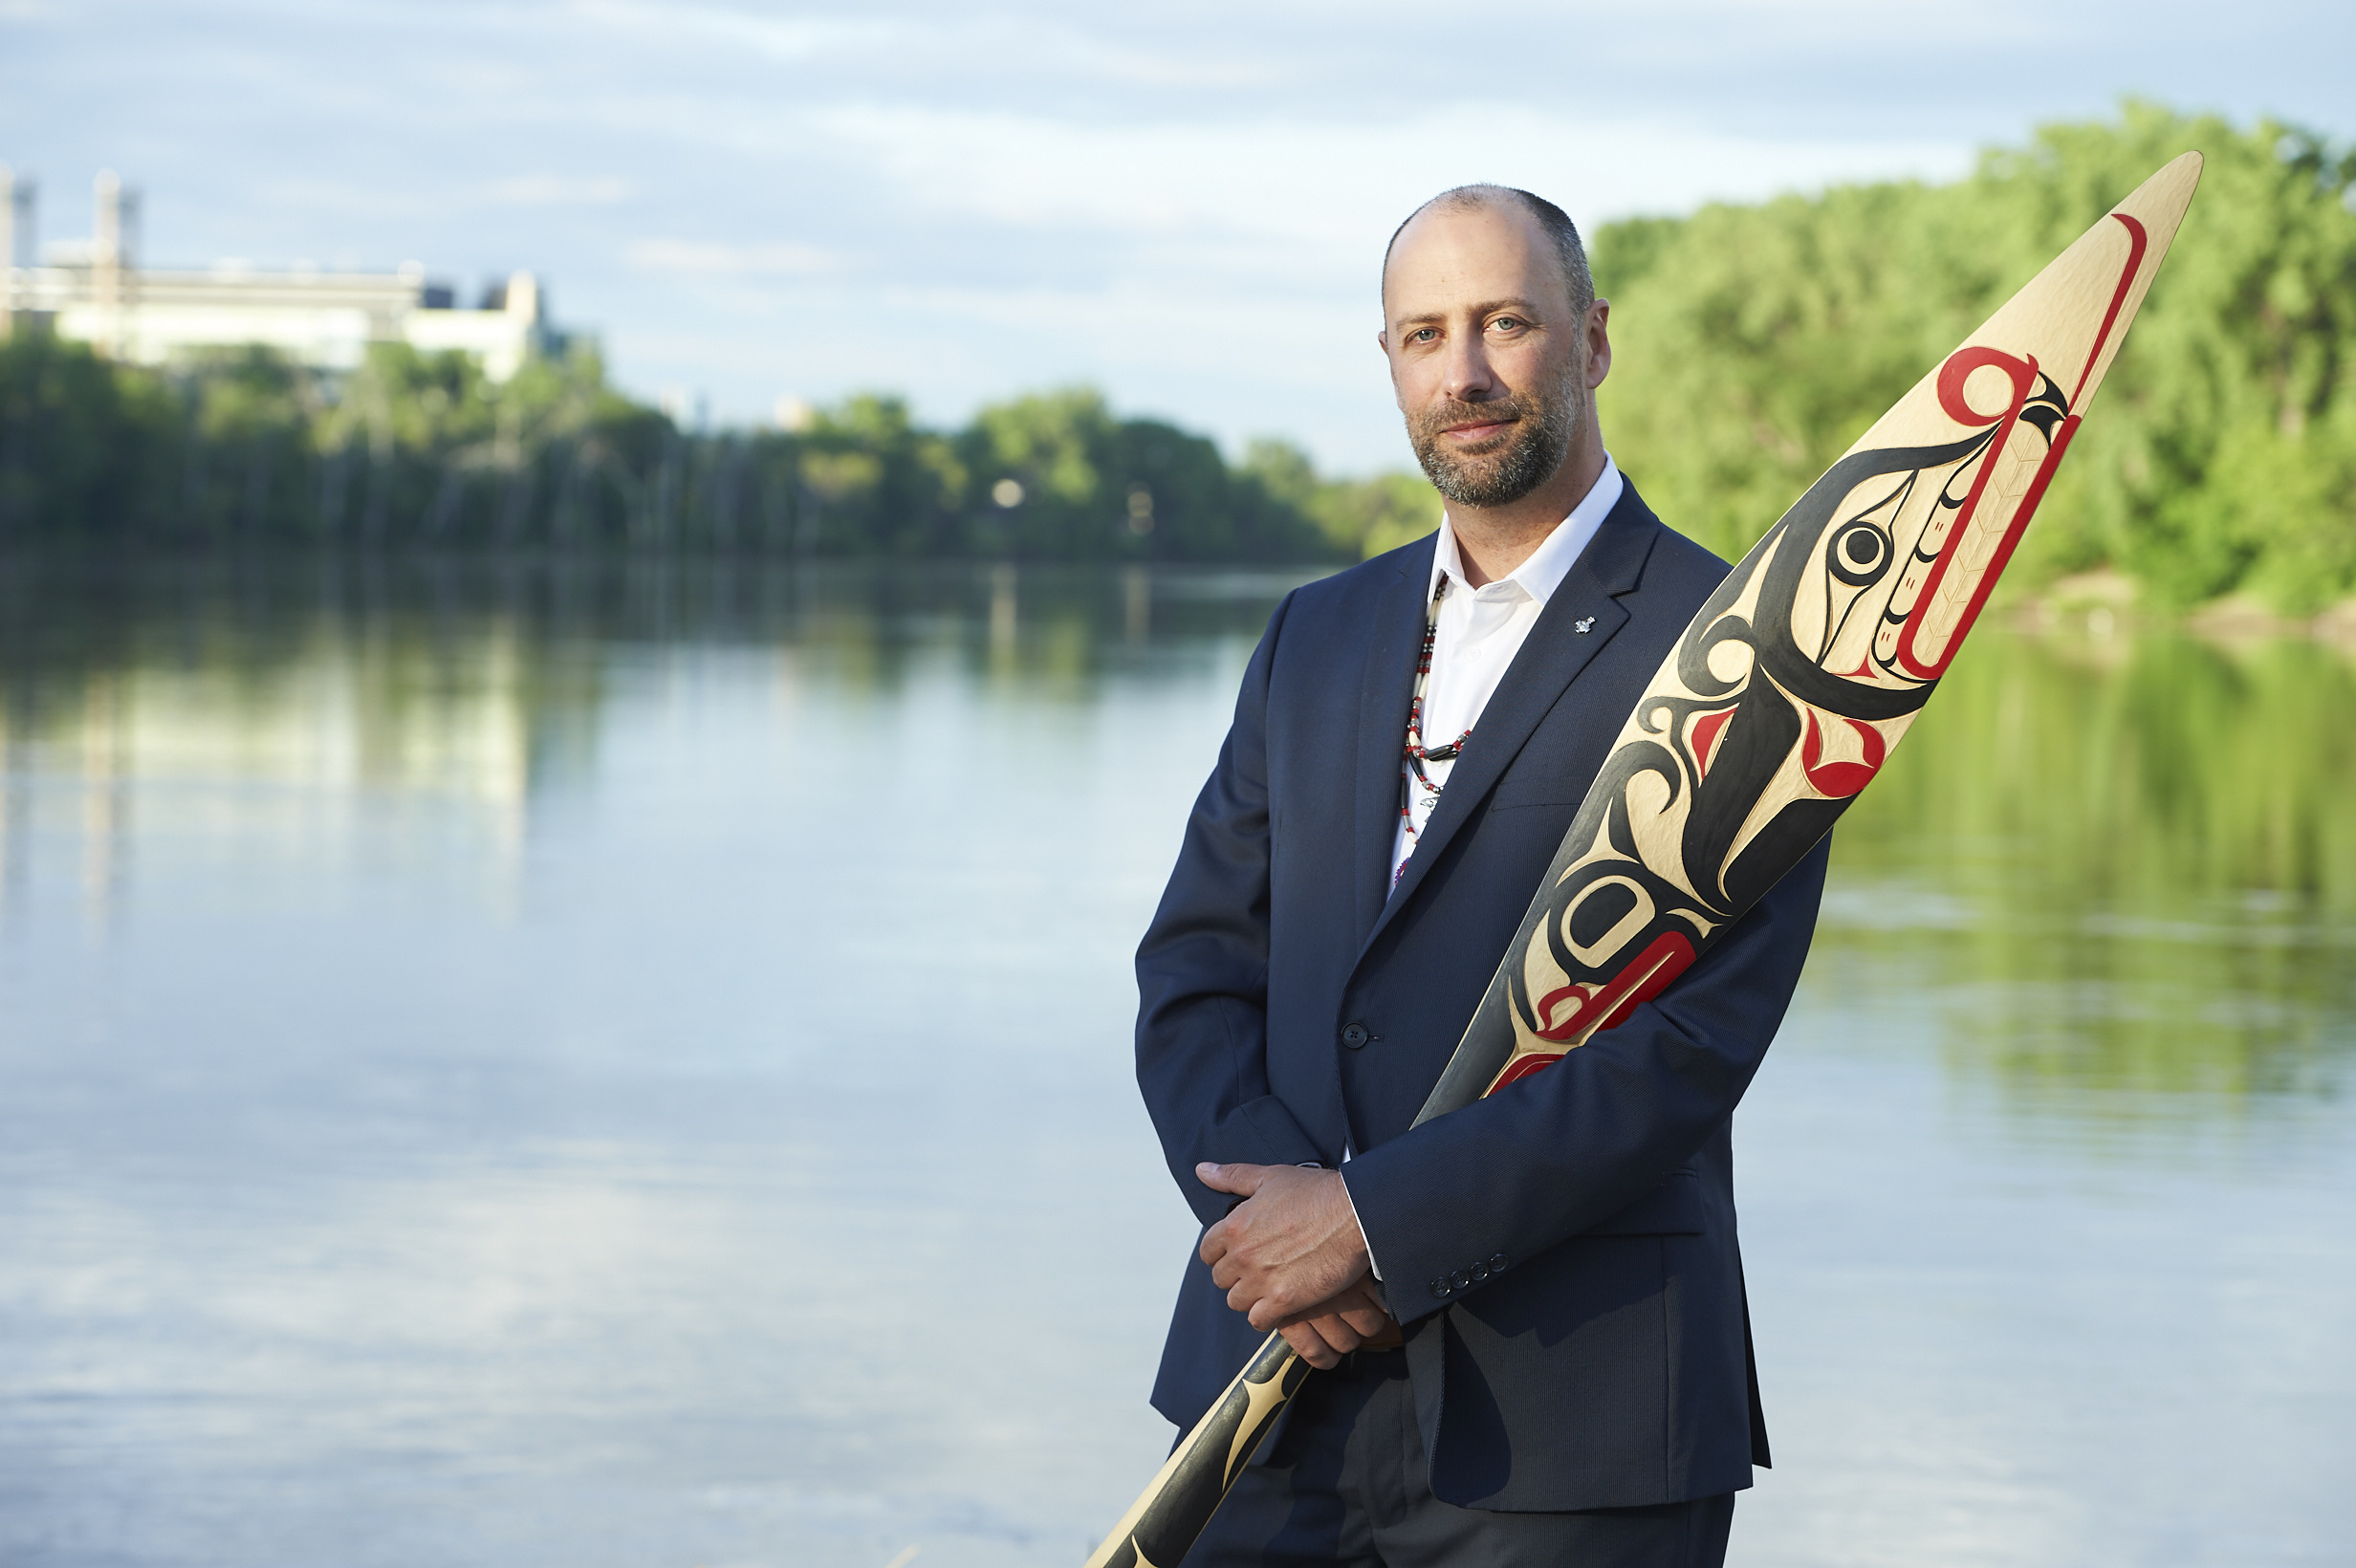 Indigenous man with a beard wearing a suit poses with a wooden paddle painted in black and red.